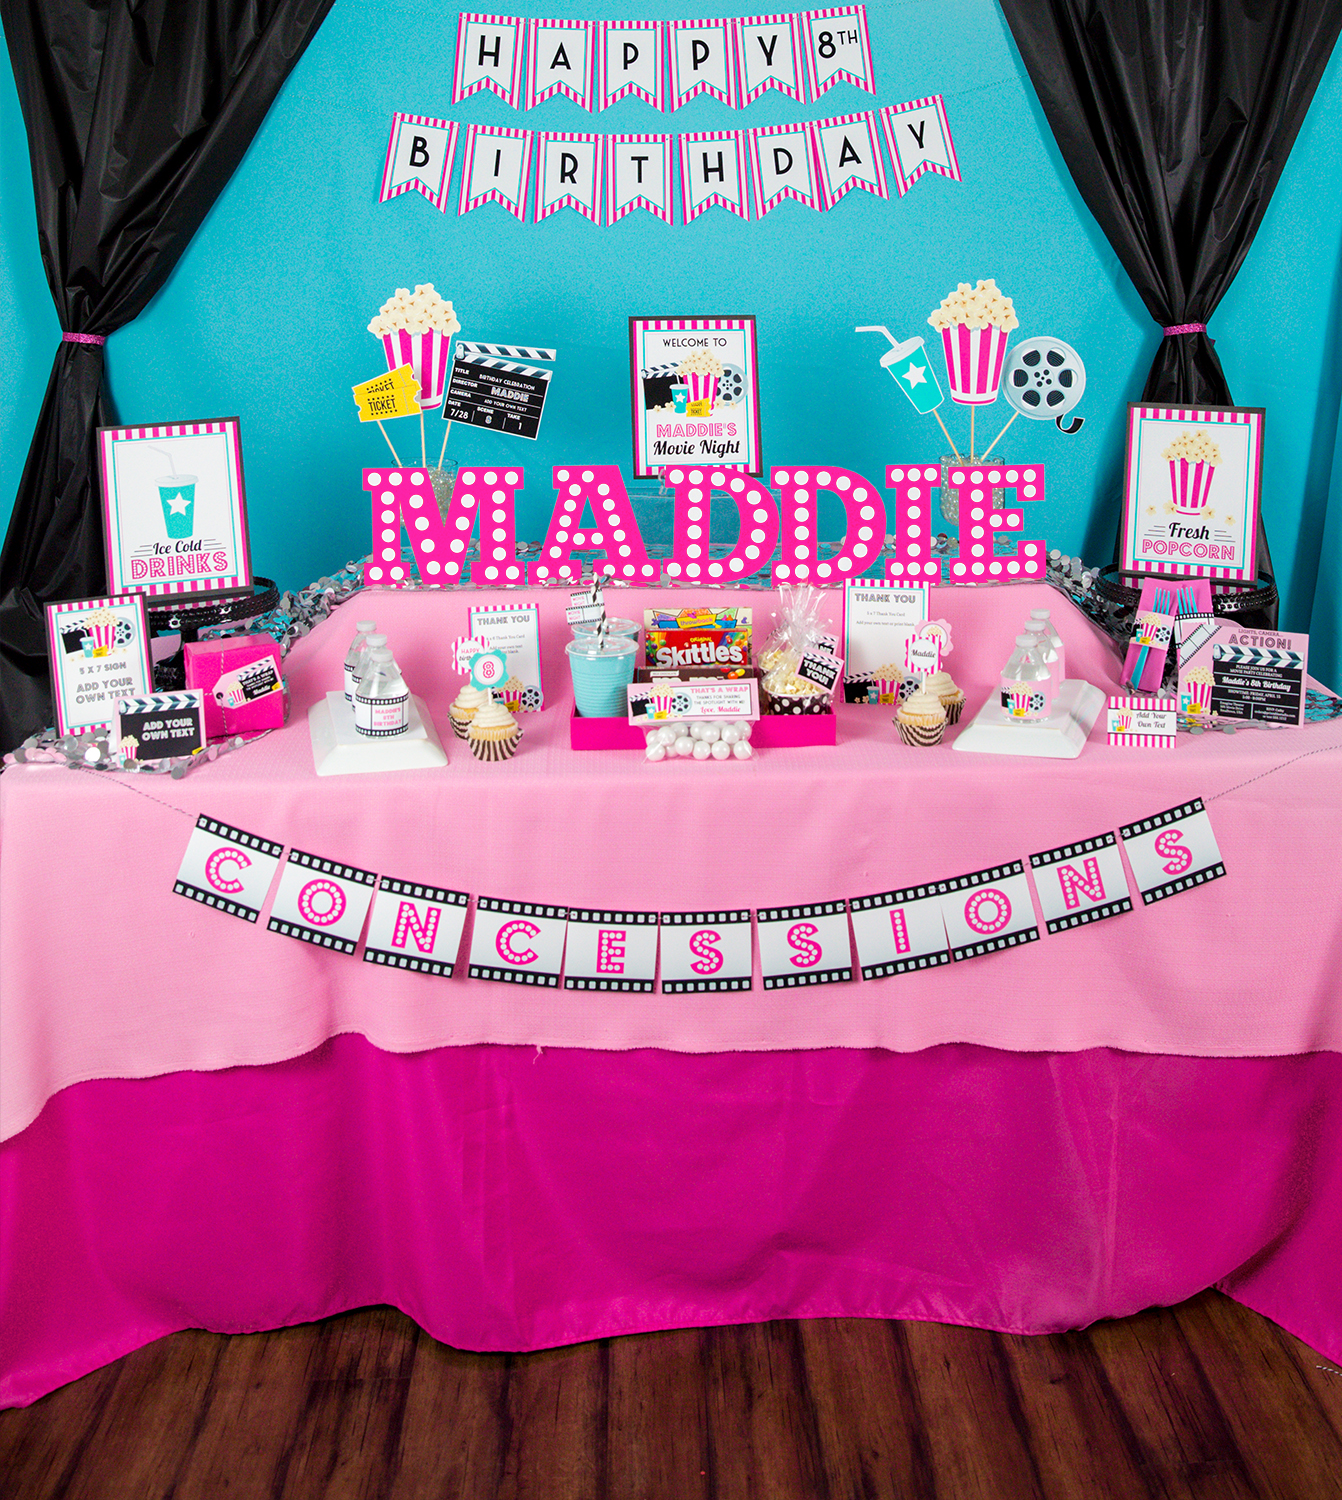 Movie Party Decorations and Invitation Set in Pink - Printable Studio